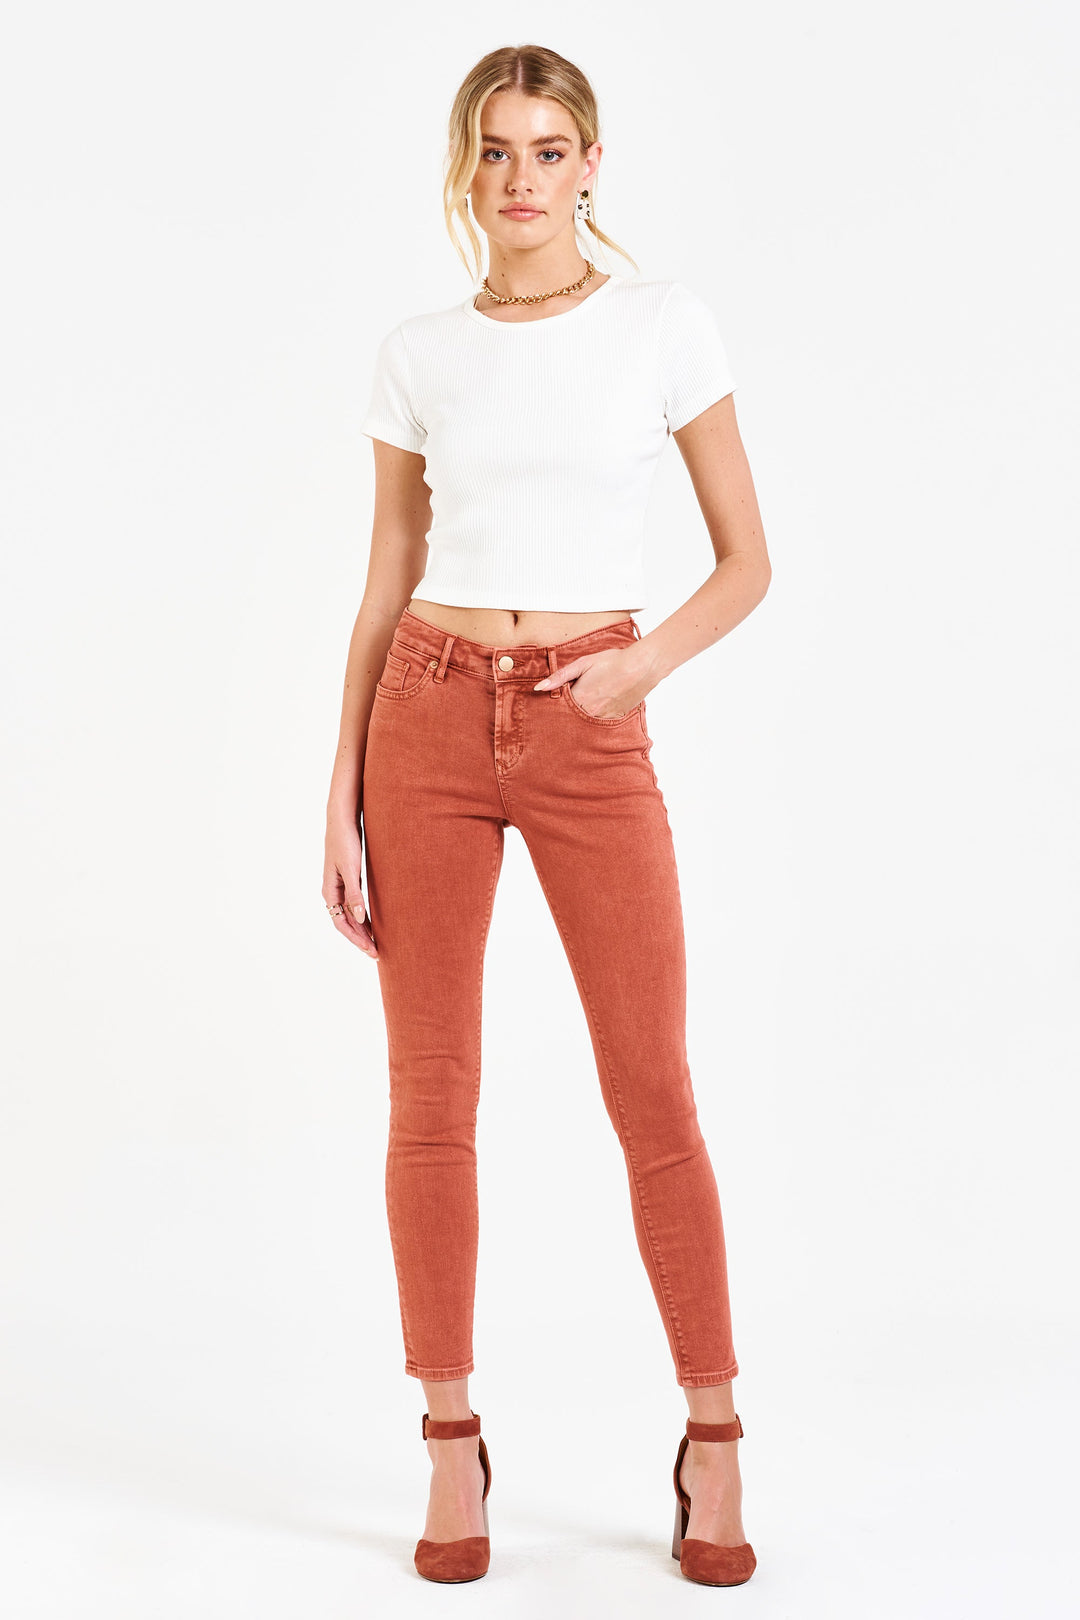 image of a female model wearing a GISELE HIGH RISE ANKLE SKINNY JEANS MELLOW MAUVE JEANS